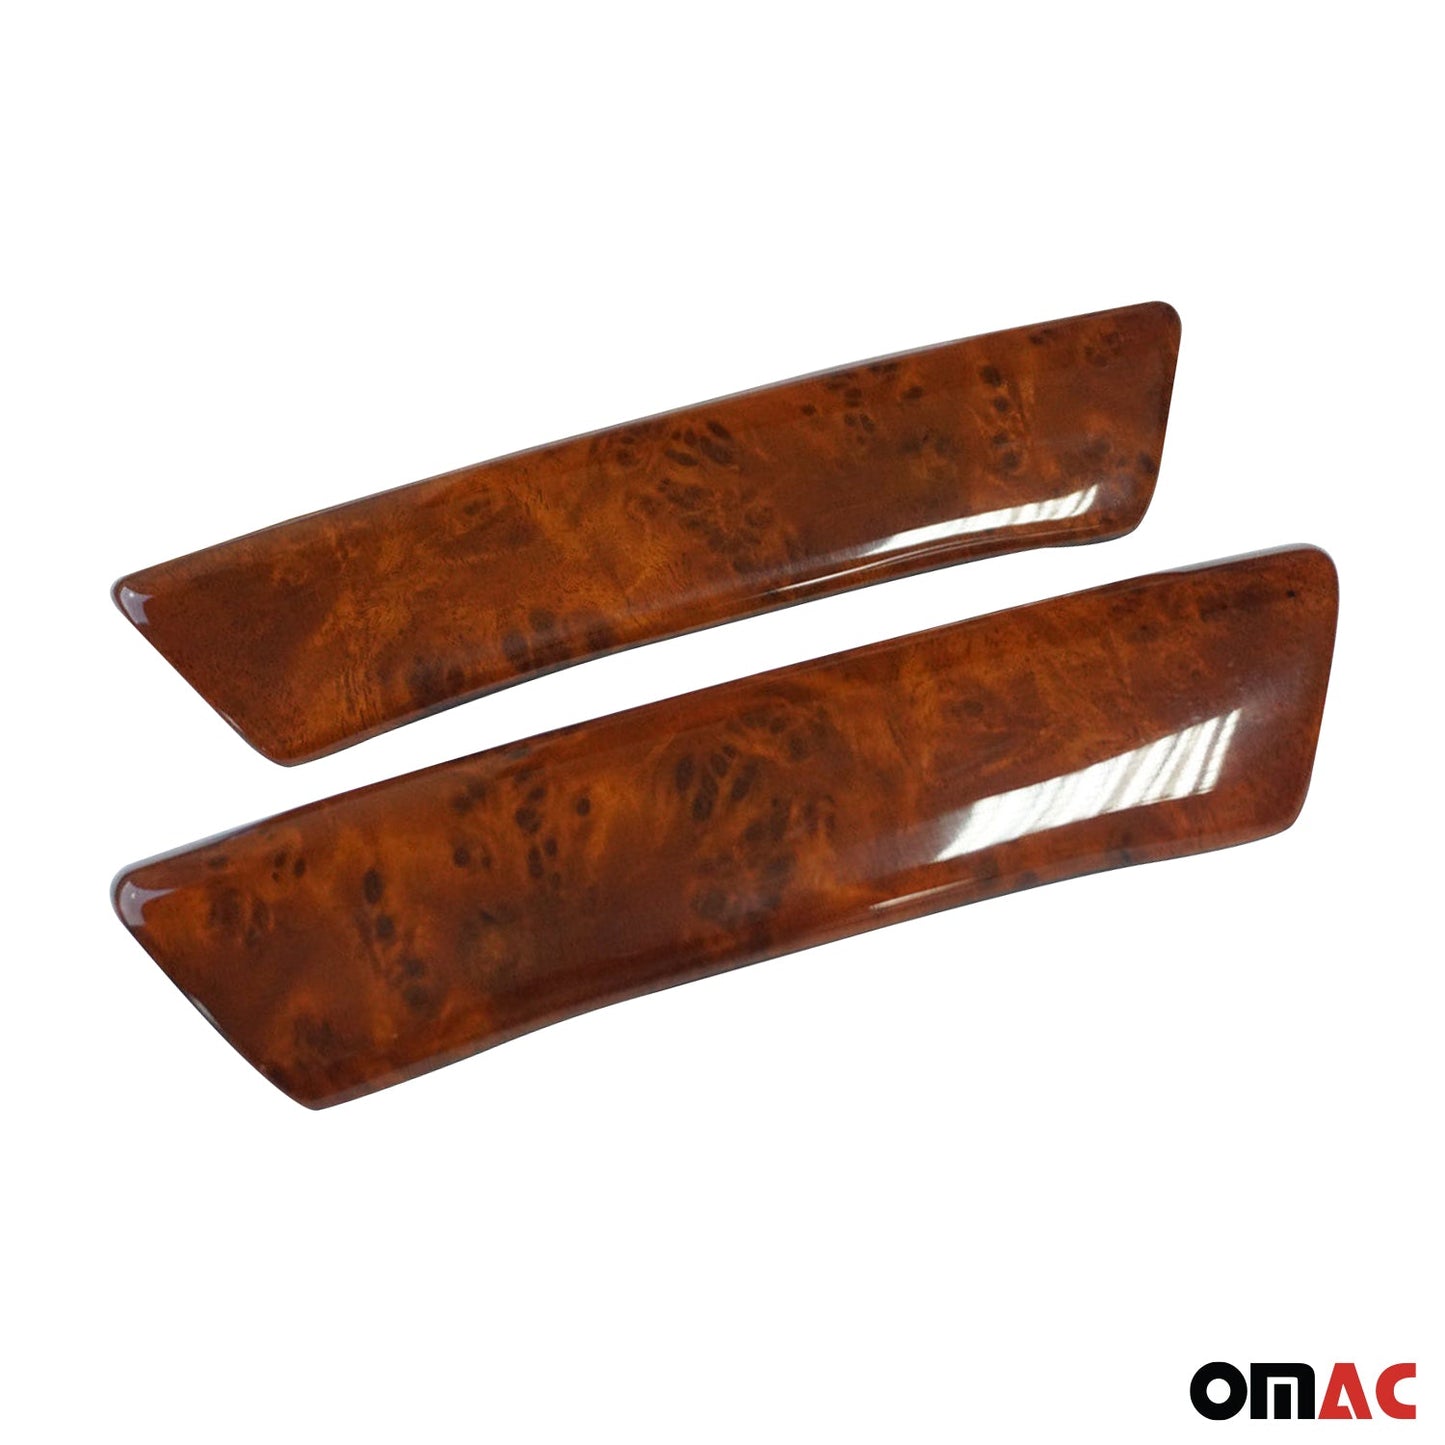 OMAC Wood Wrap Interior Door Handle Cover for VW T5 Transporter 2003-2015 Brown 2 Pcs 7522032